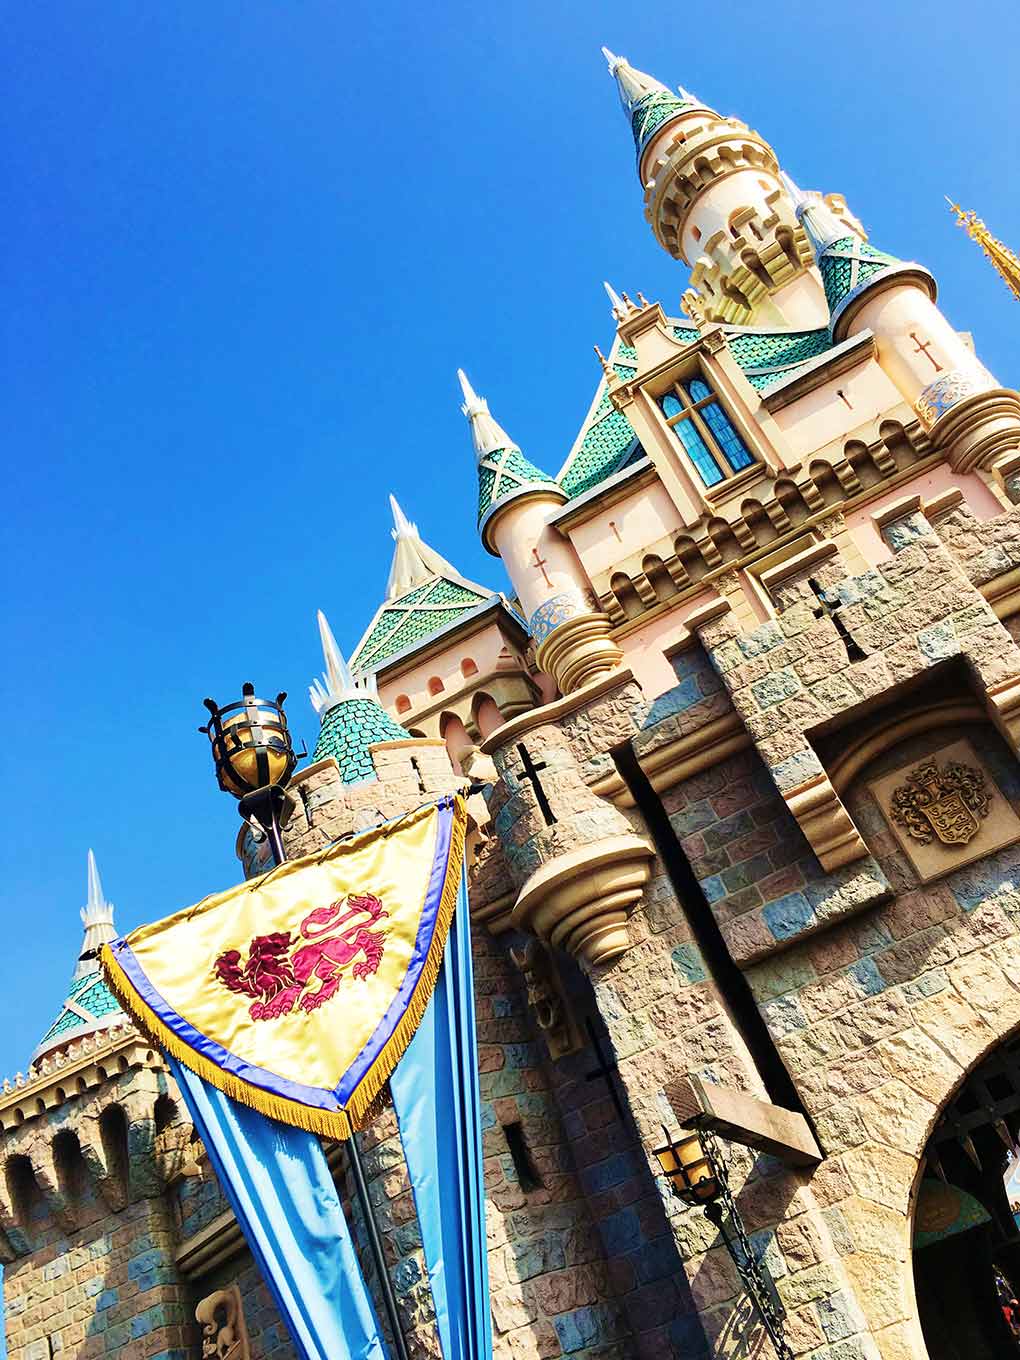 Looking to get the best pictures on your next Disneyland vacation? We have you covered with our list of Best Photo-Ops at the Disneyland Resort. #disneyland #disneylandresort #disneylandtips